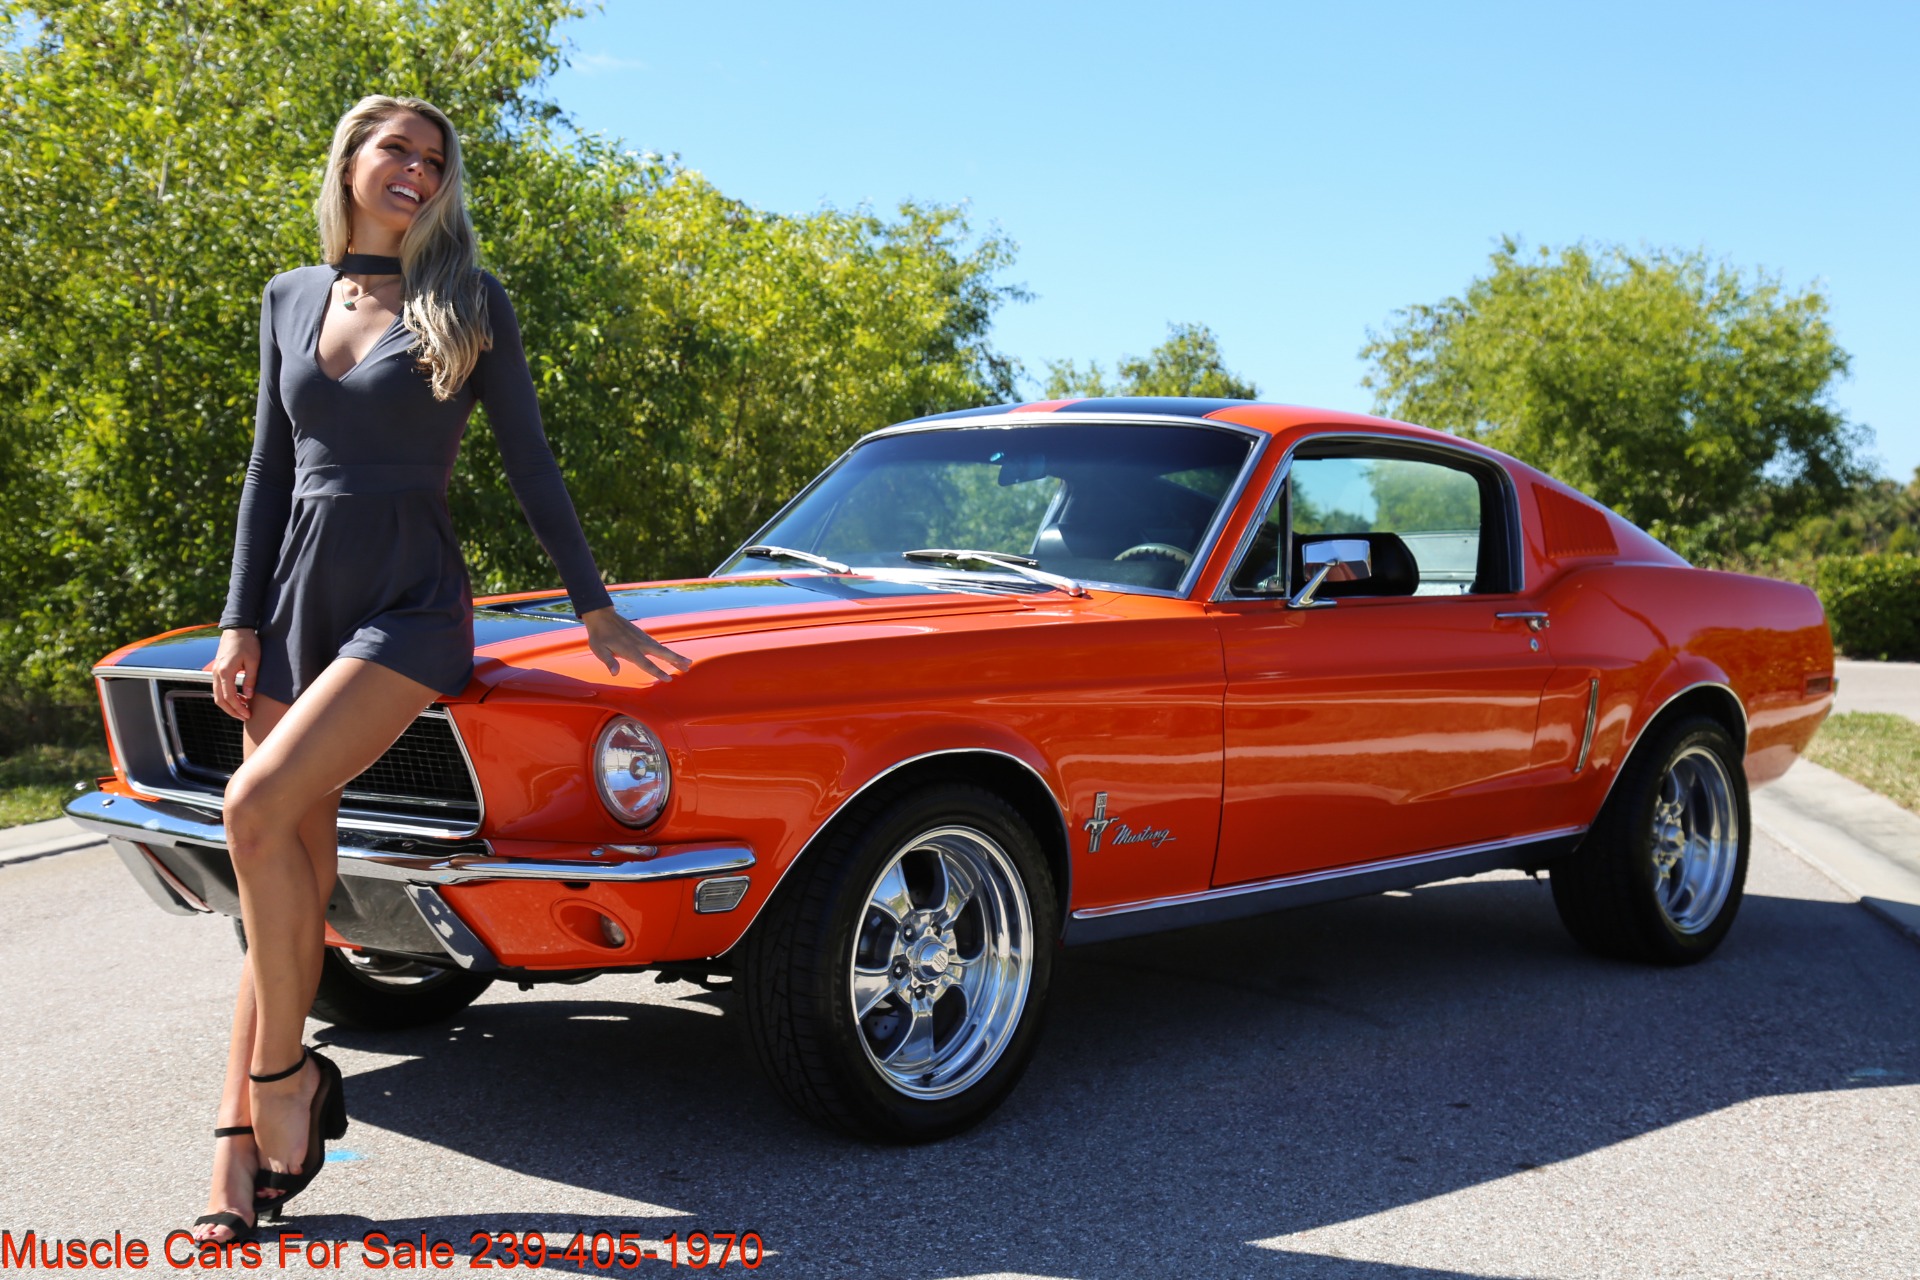 Used 1968 Ford Mustang Fastback For Sale ($53,000) | Muscle Cars for ...